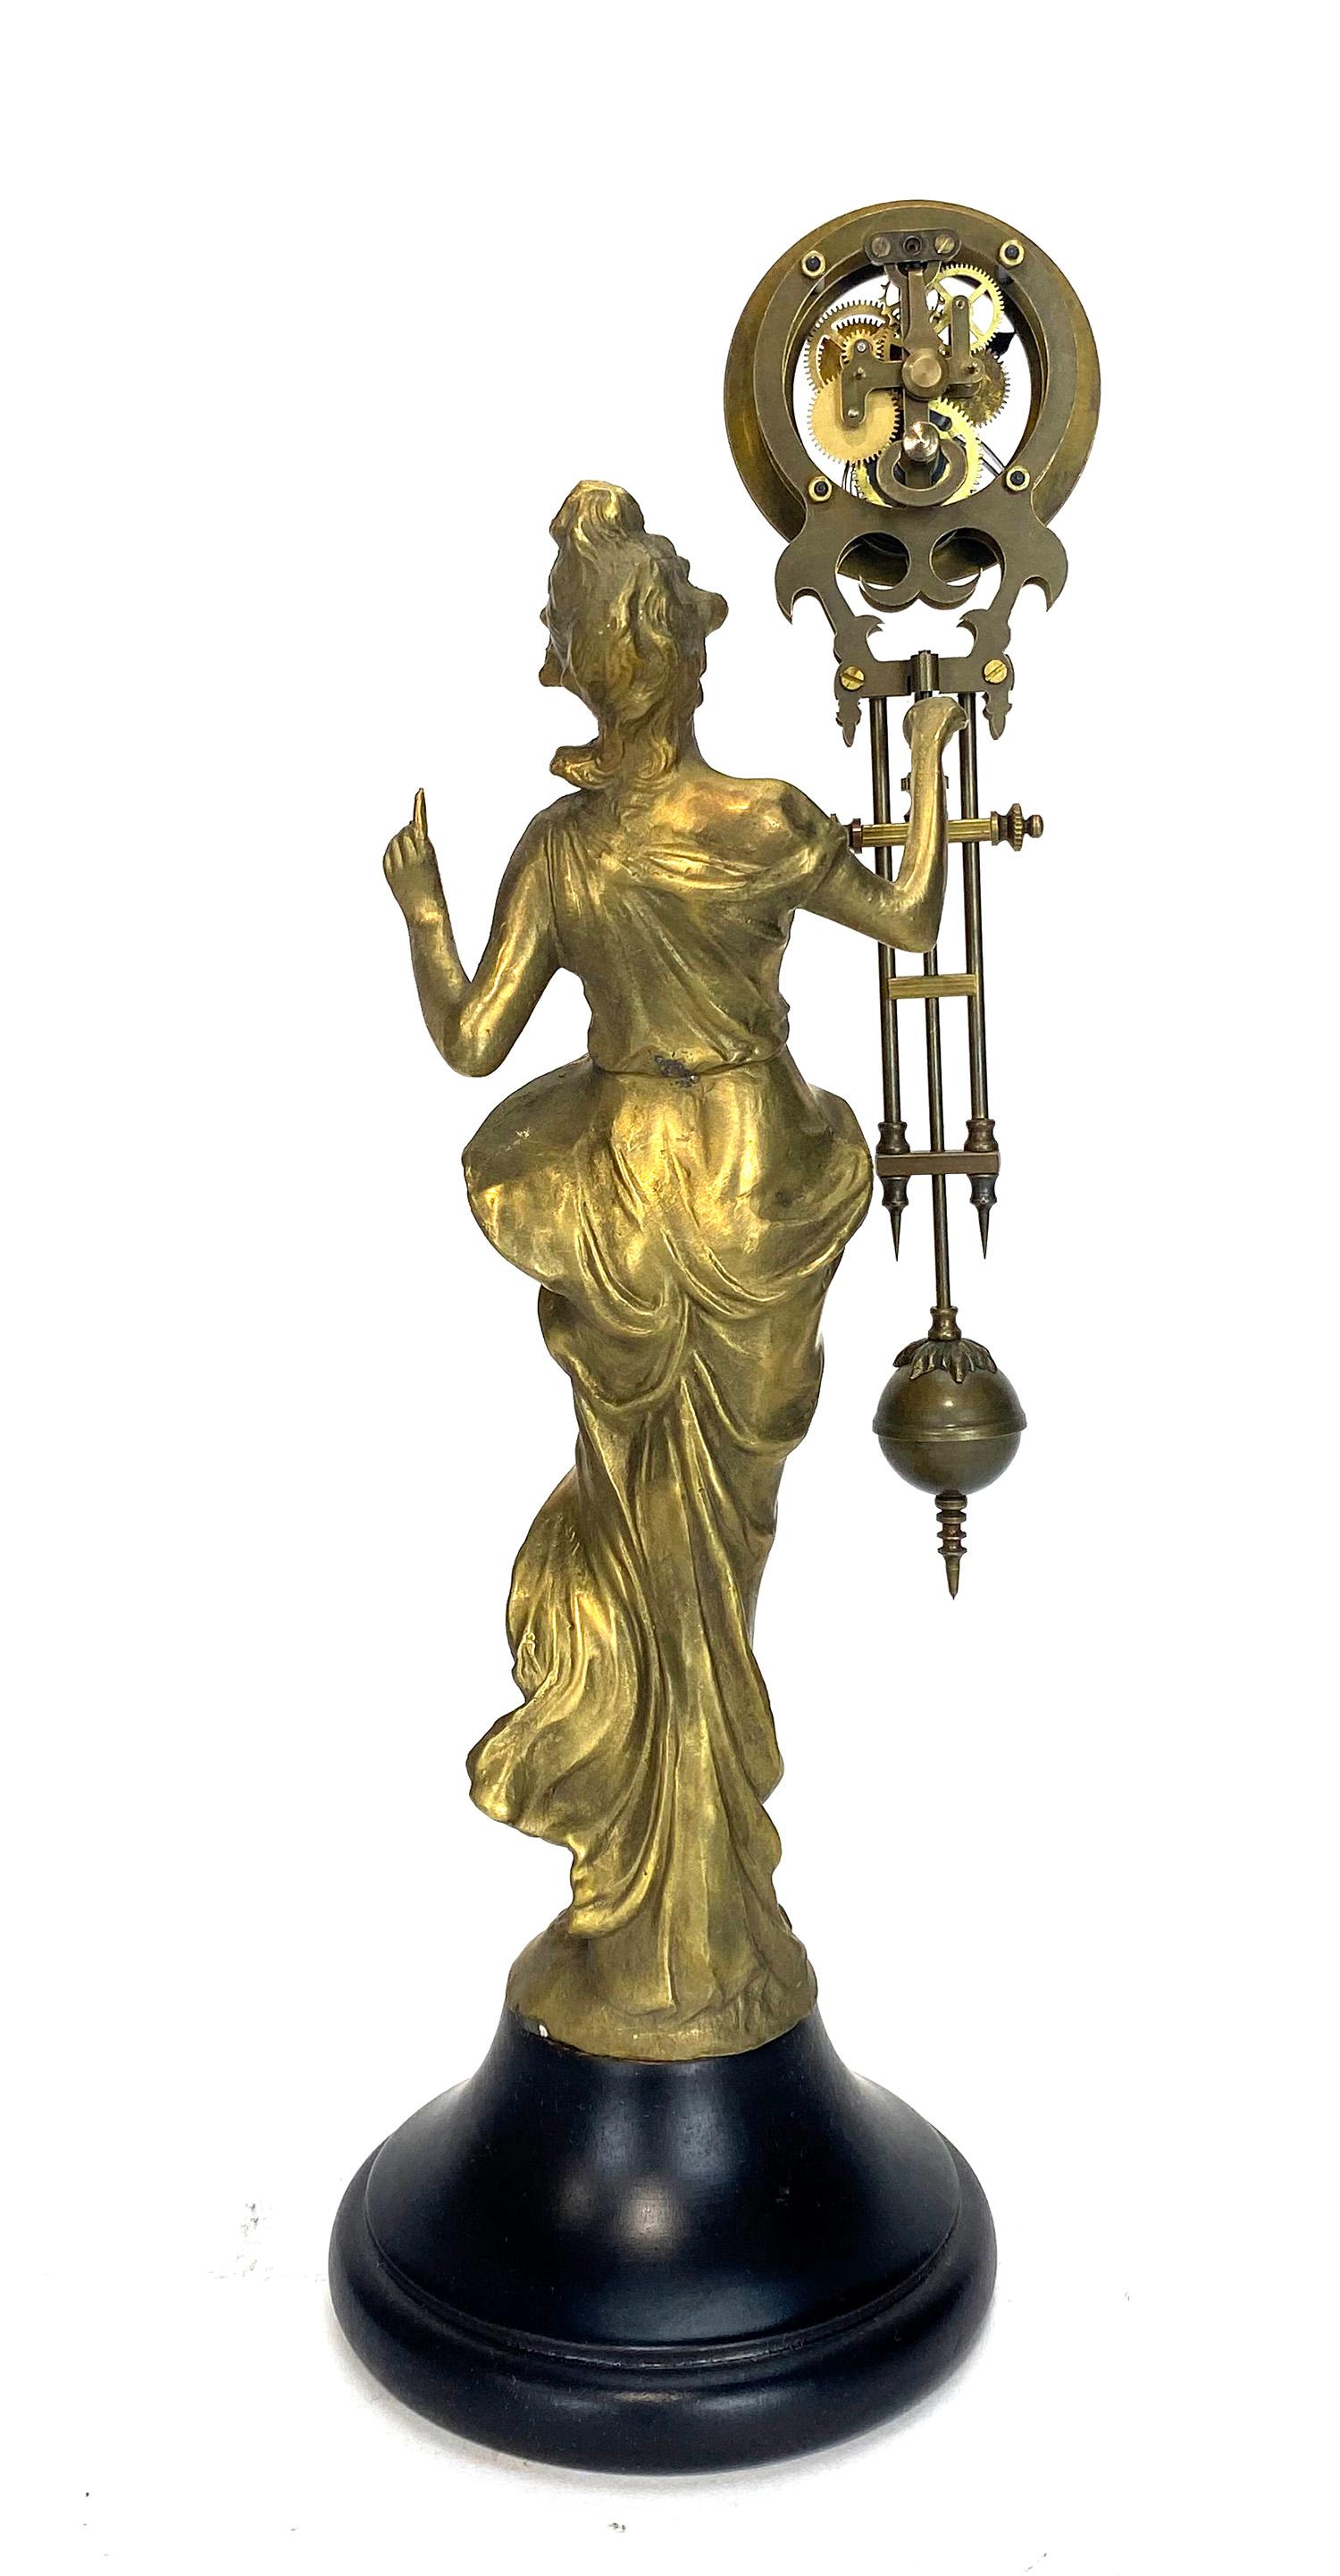 Mystery Brass Diana Figure Swinging Clock with 8 Day Skeleton Movement For Sale at 1stDibs